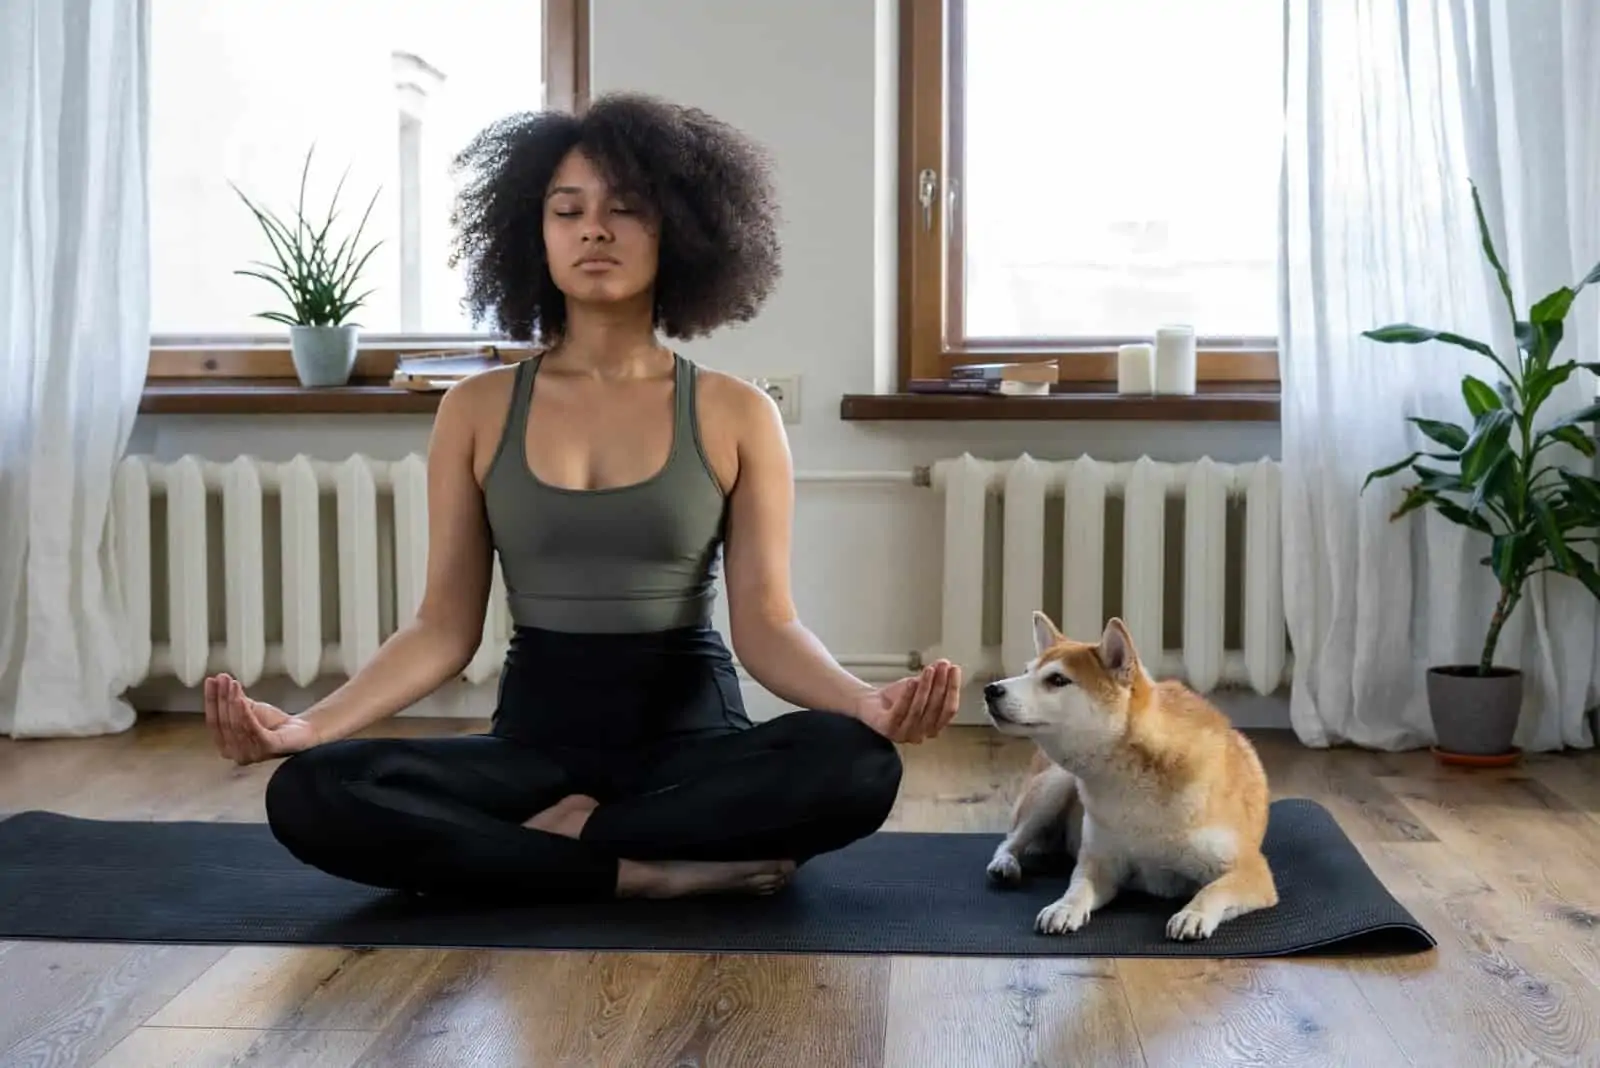 woman with curly hair meditating while sitting near dog